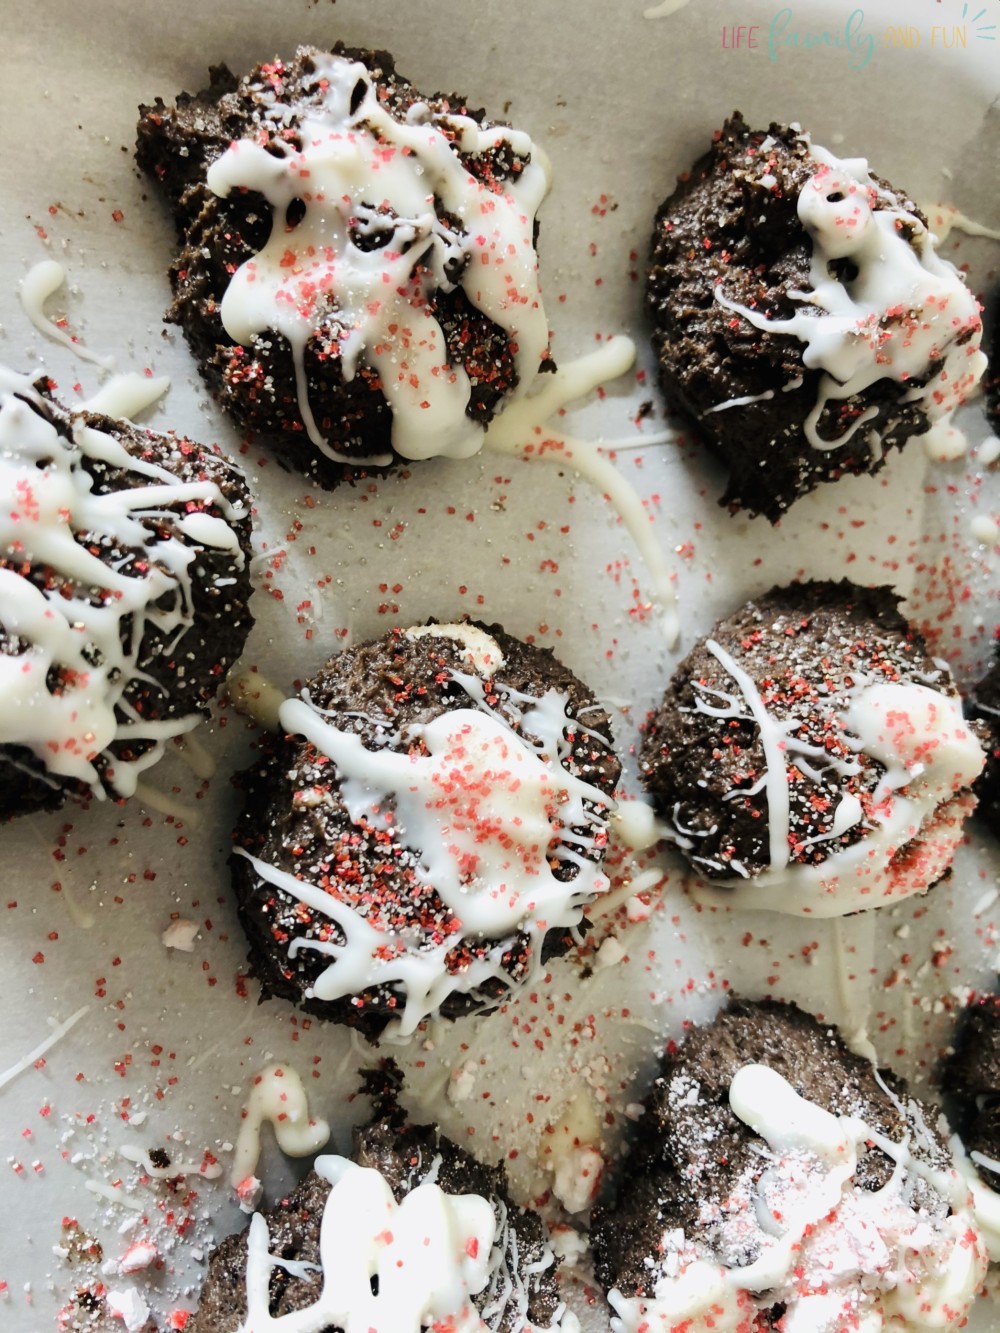 Oreo truffles with white chocolate drizzle and sprinkles